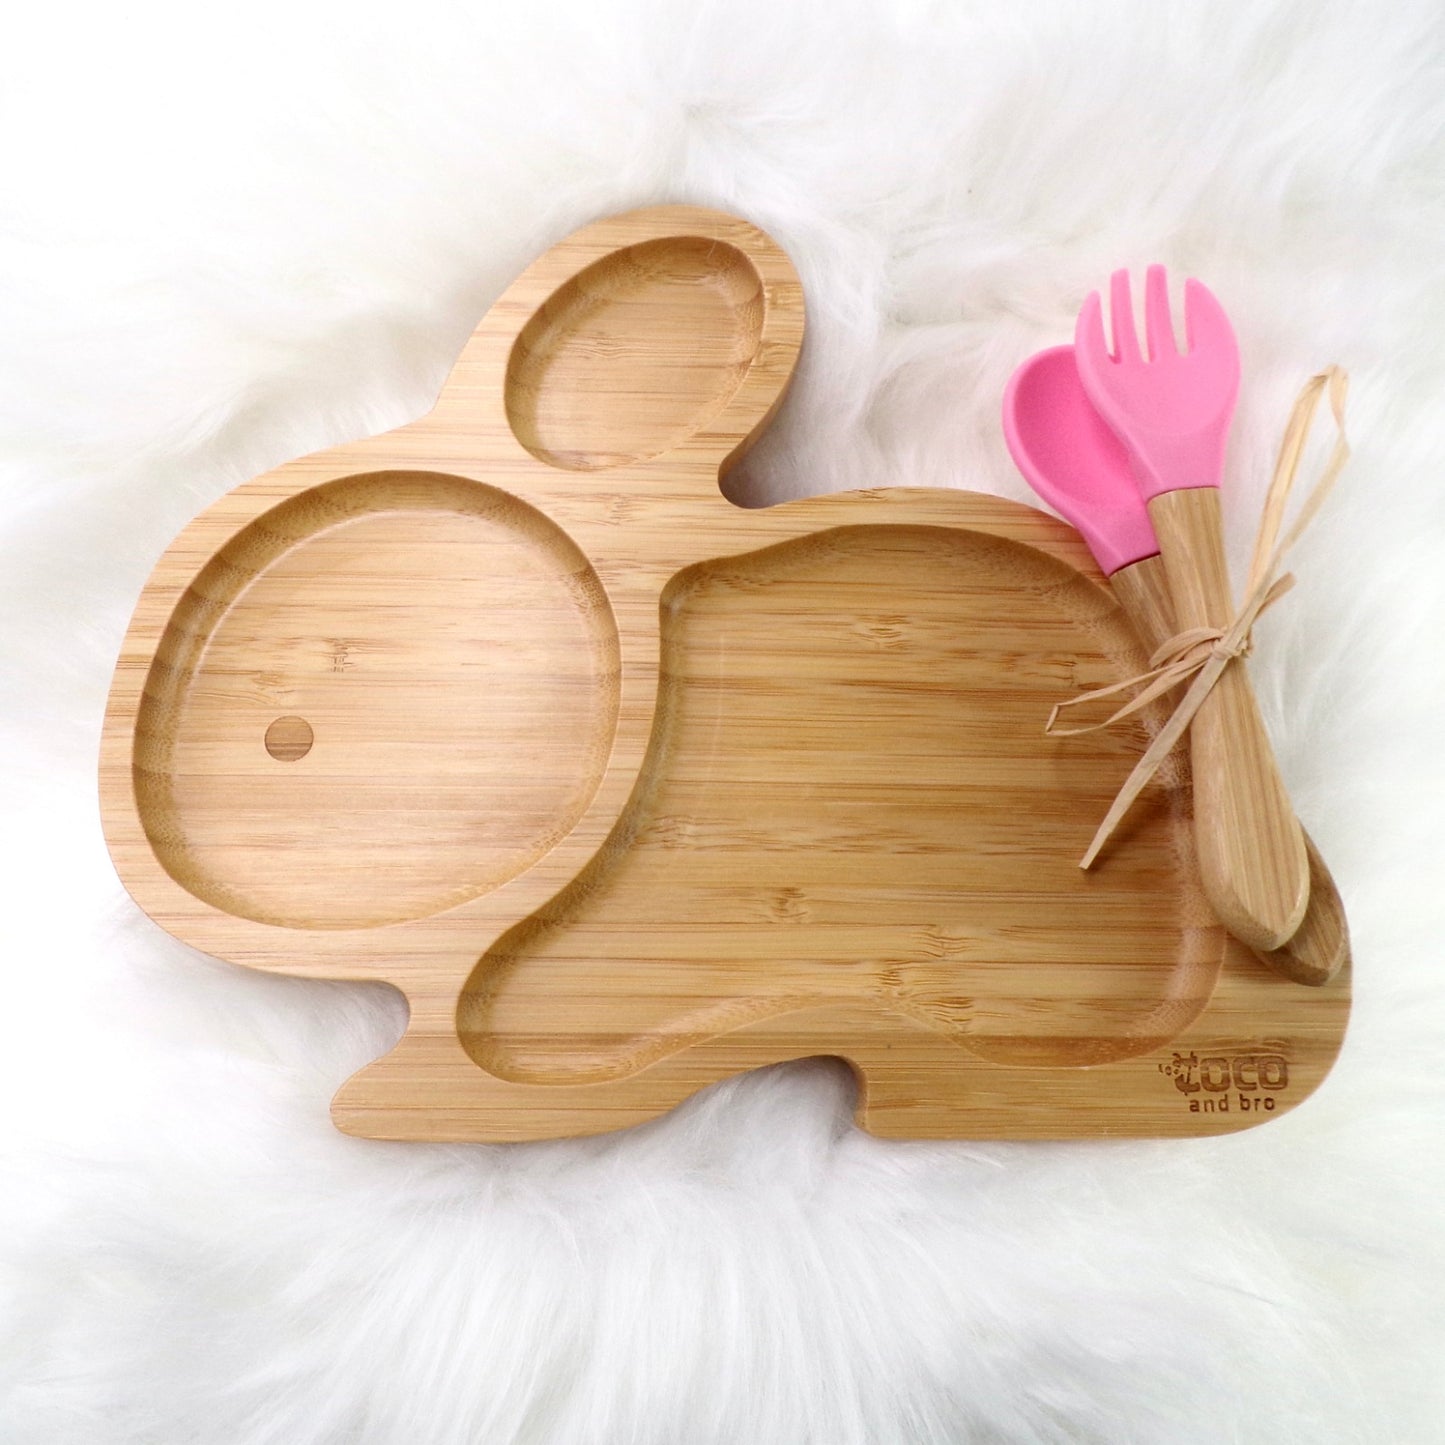 A bamboo children’s plate, with multiple food sections, in a rabbit design. The bamboo plate features a pink silicone suction ring at the back, and includes bamboo fork and spoon utensils in matching colours. Front view.